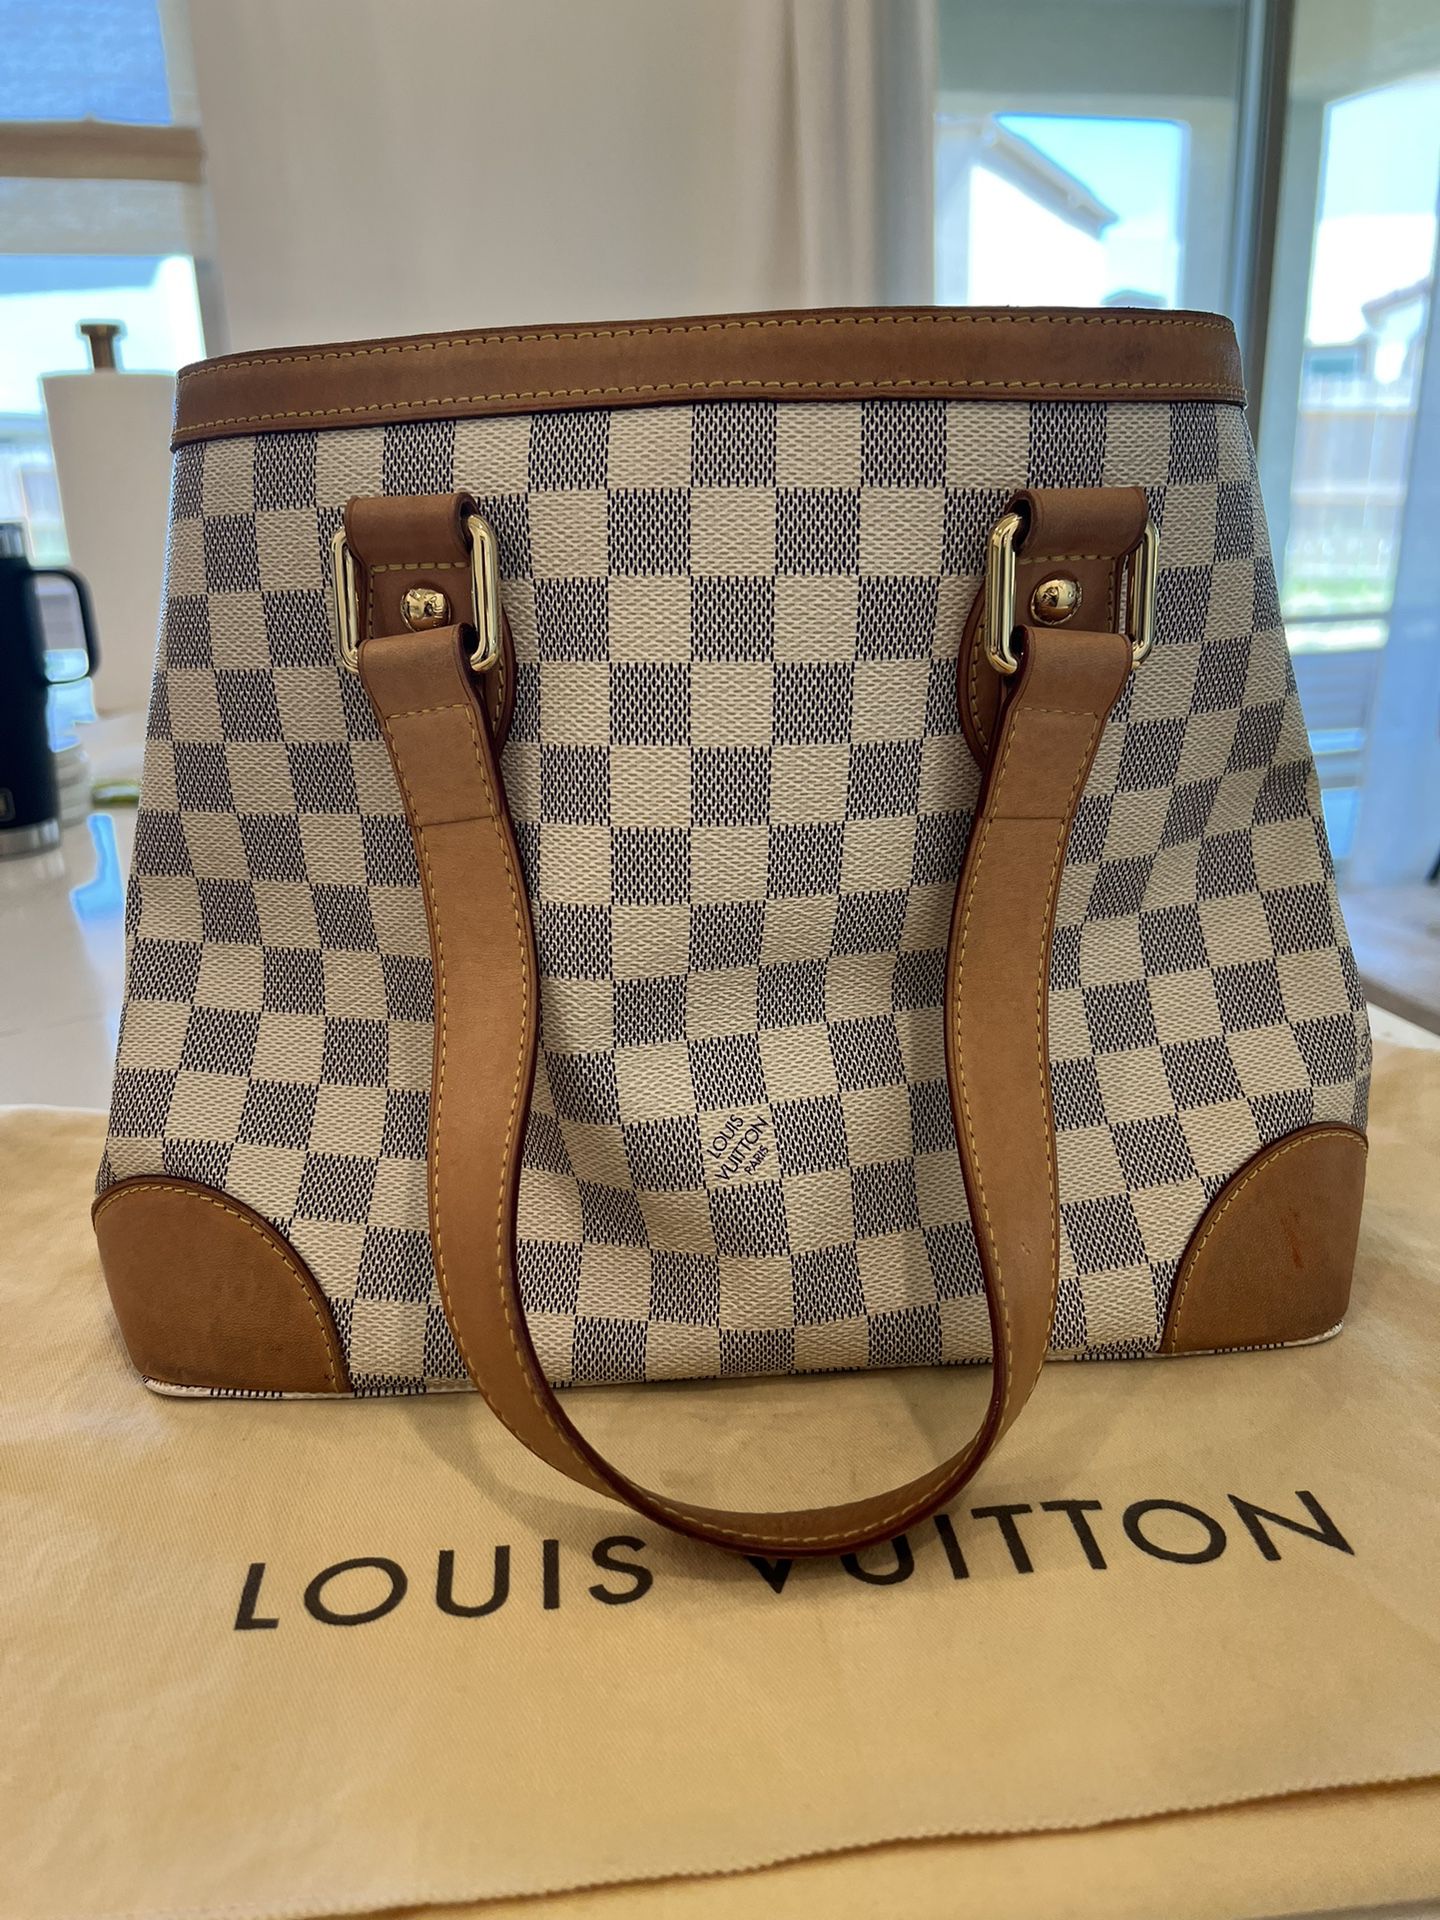 Louis Vuitton Hampstead in Damier Azur - Your Glamorous Travel Sidekick!  🌟👜 - Auth bag reference : r/WagoonLadies